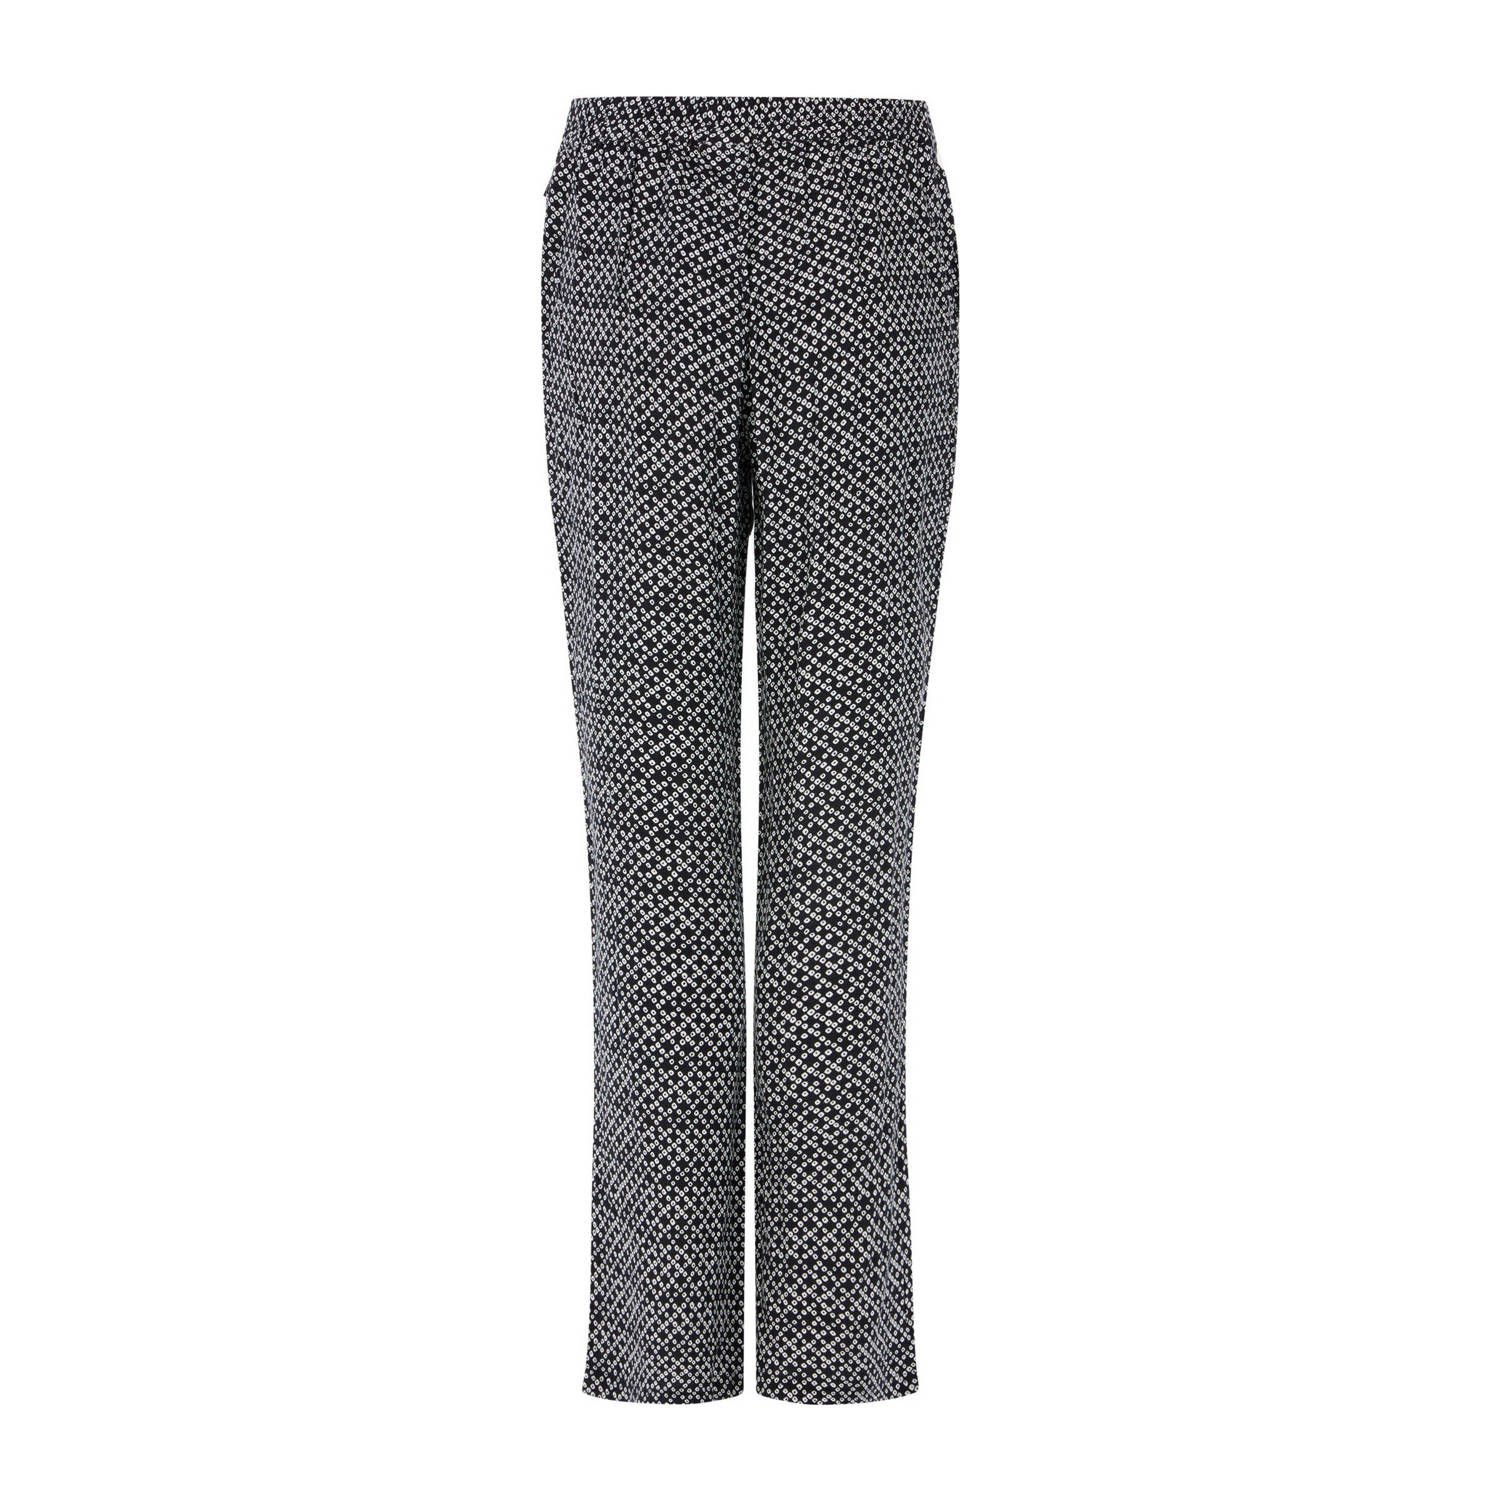 Protest straight fit pantalon met all over print zwart wit